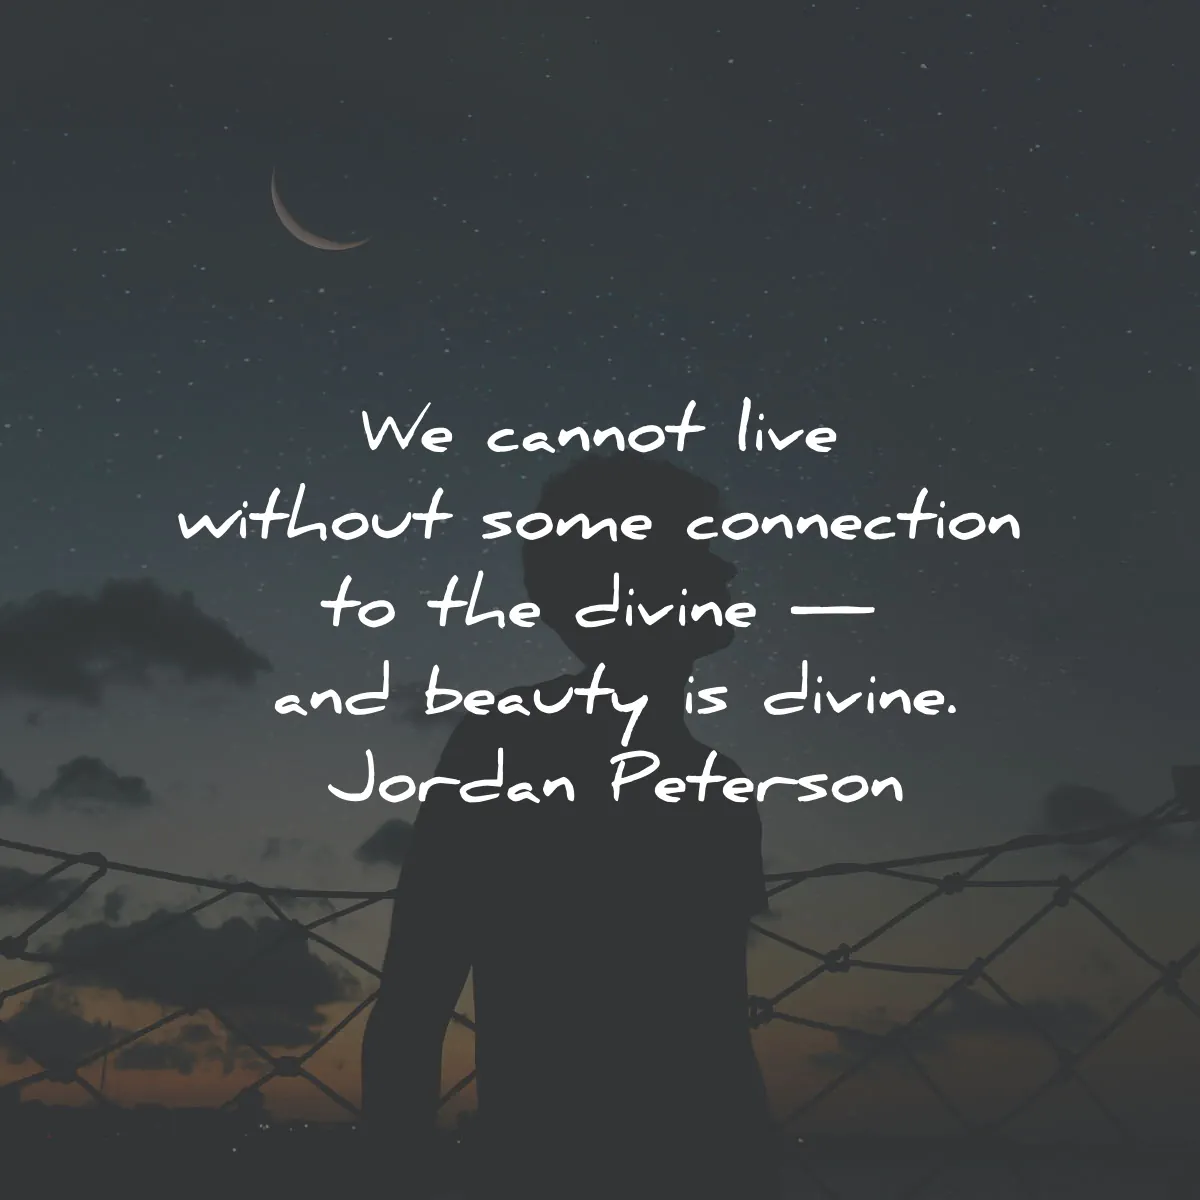 beyond order quotes summary jordan peterson cannot live connection divine beauty wisdom